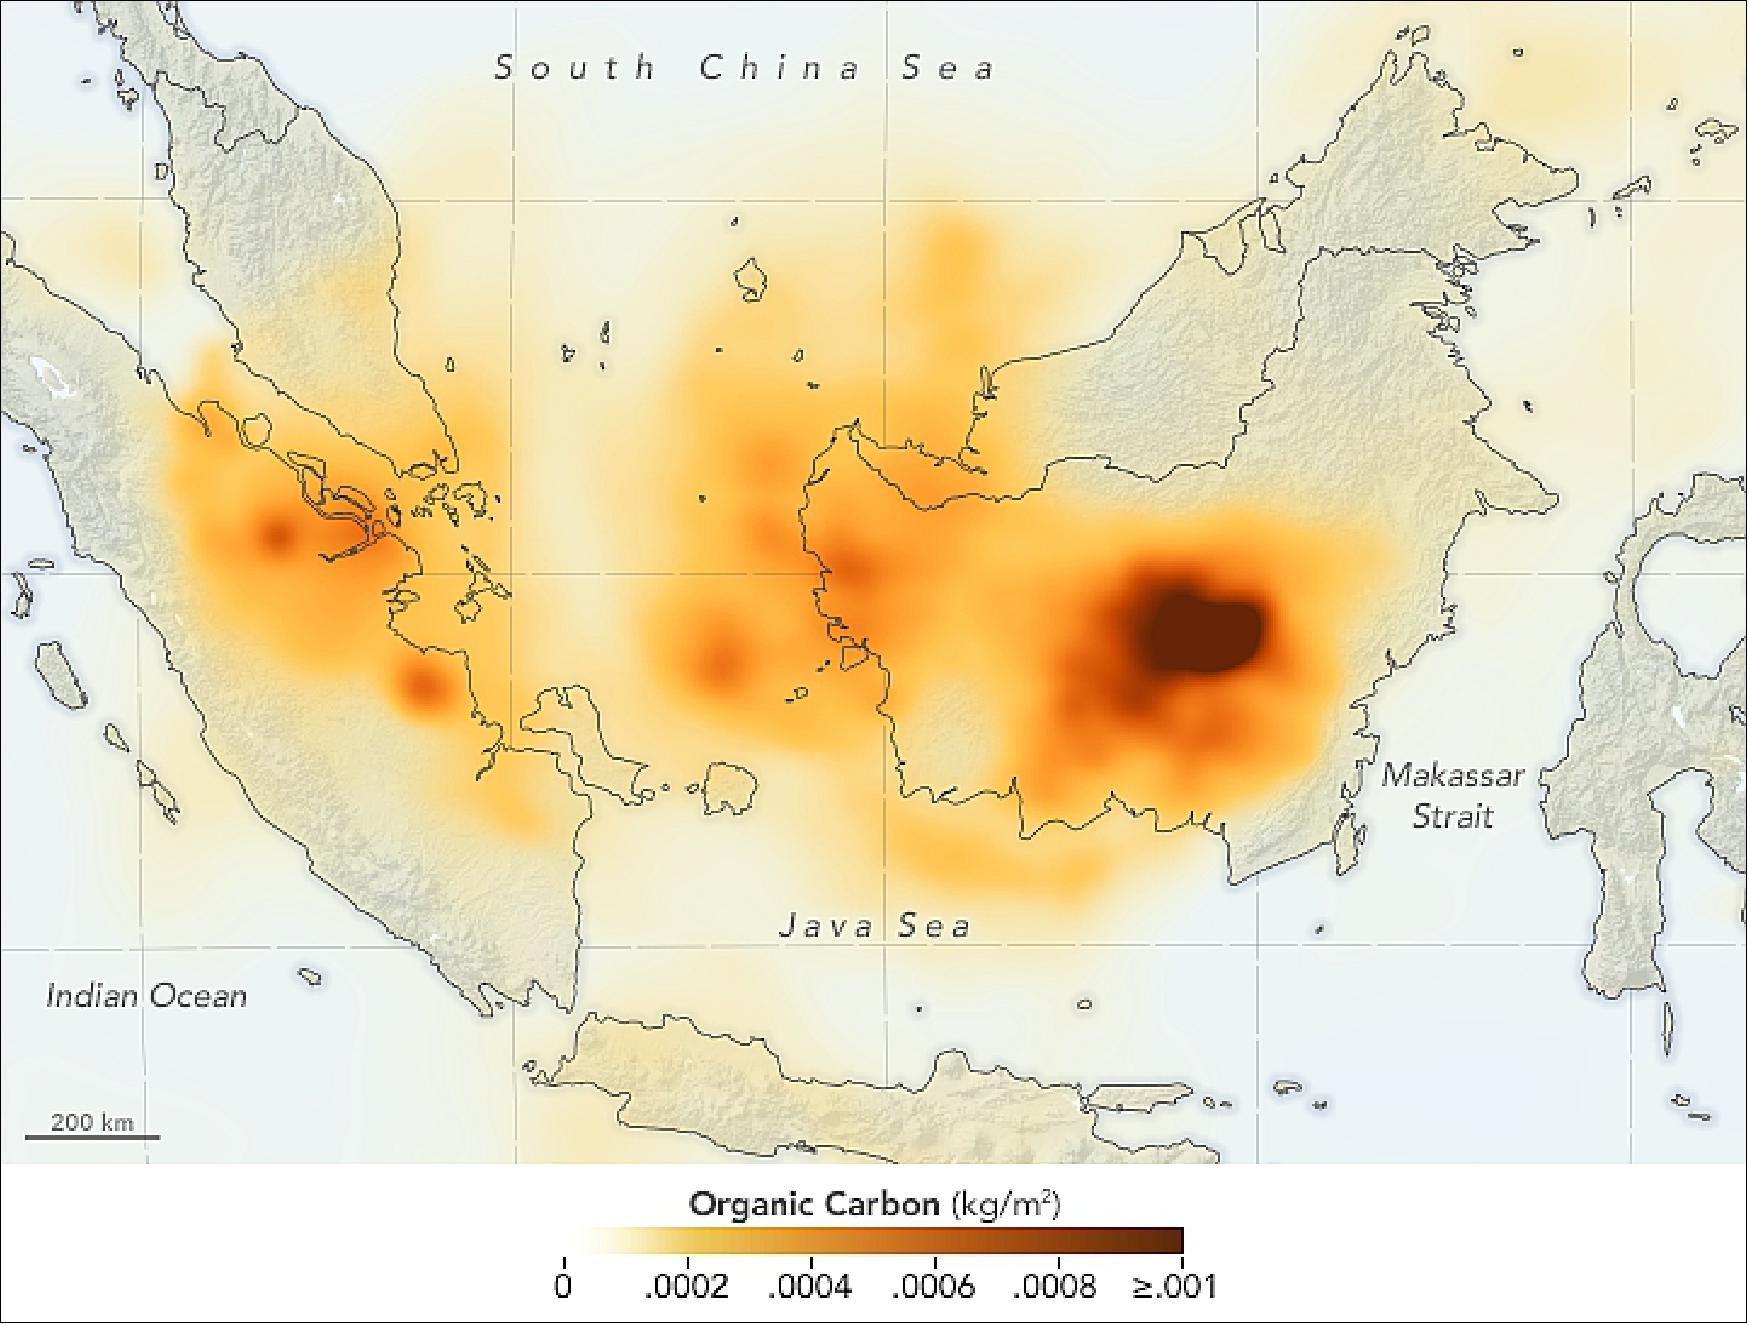 Figure 19: The map shows organic carbon data from the GEOS forward processing (GEOS-FP) model, which assimilates information from satellite, aircraft, and ground-based observing systems. To simulate organic carbon, modelers make use of satellite observations of aerosols and fires. GEOS-FP also ingests meteorological data like air temperature, moisture, and winds to project the plume’s behavior. In this case, smoke has stayed relatively close to the source of the fires because winds have generally been gentle (image credit: NASA Earth Observatory, map by Joshua Stevens, using GEOS-5 data from the Global Modeling and Assimilation Office at NASA/GSFC. Story by Adam Voiland)